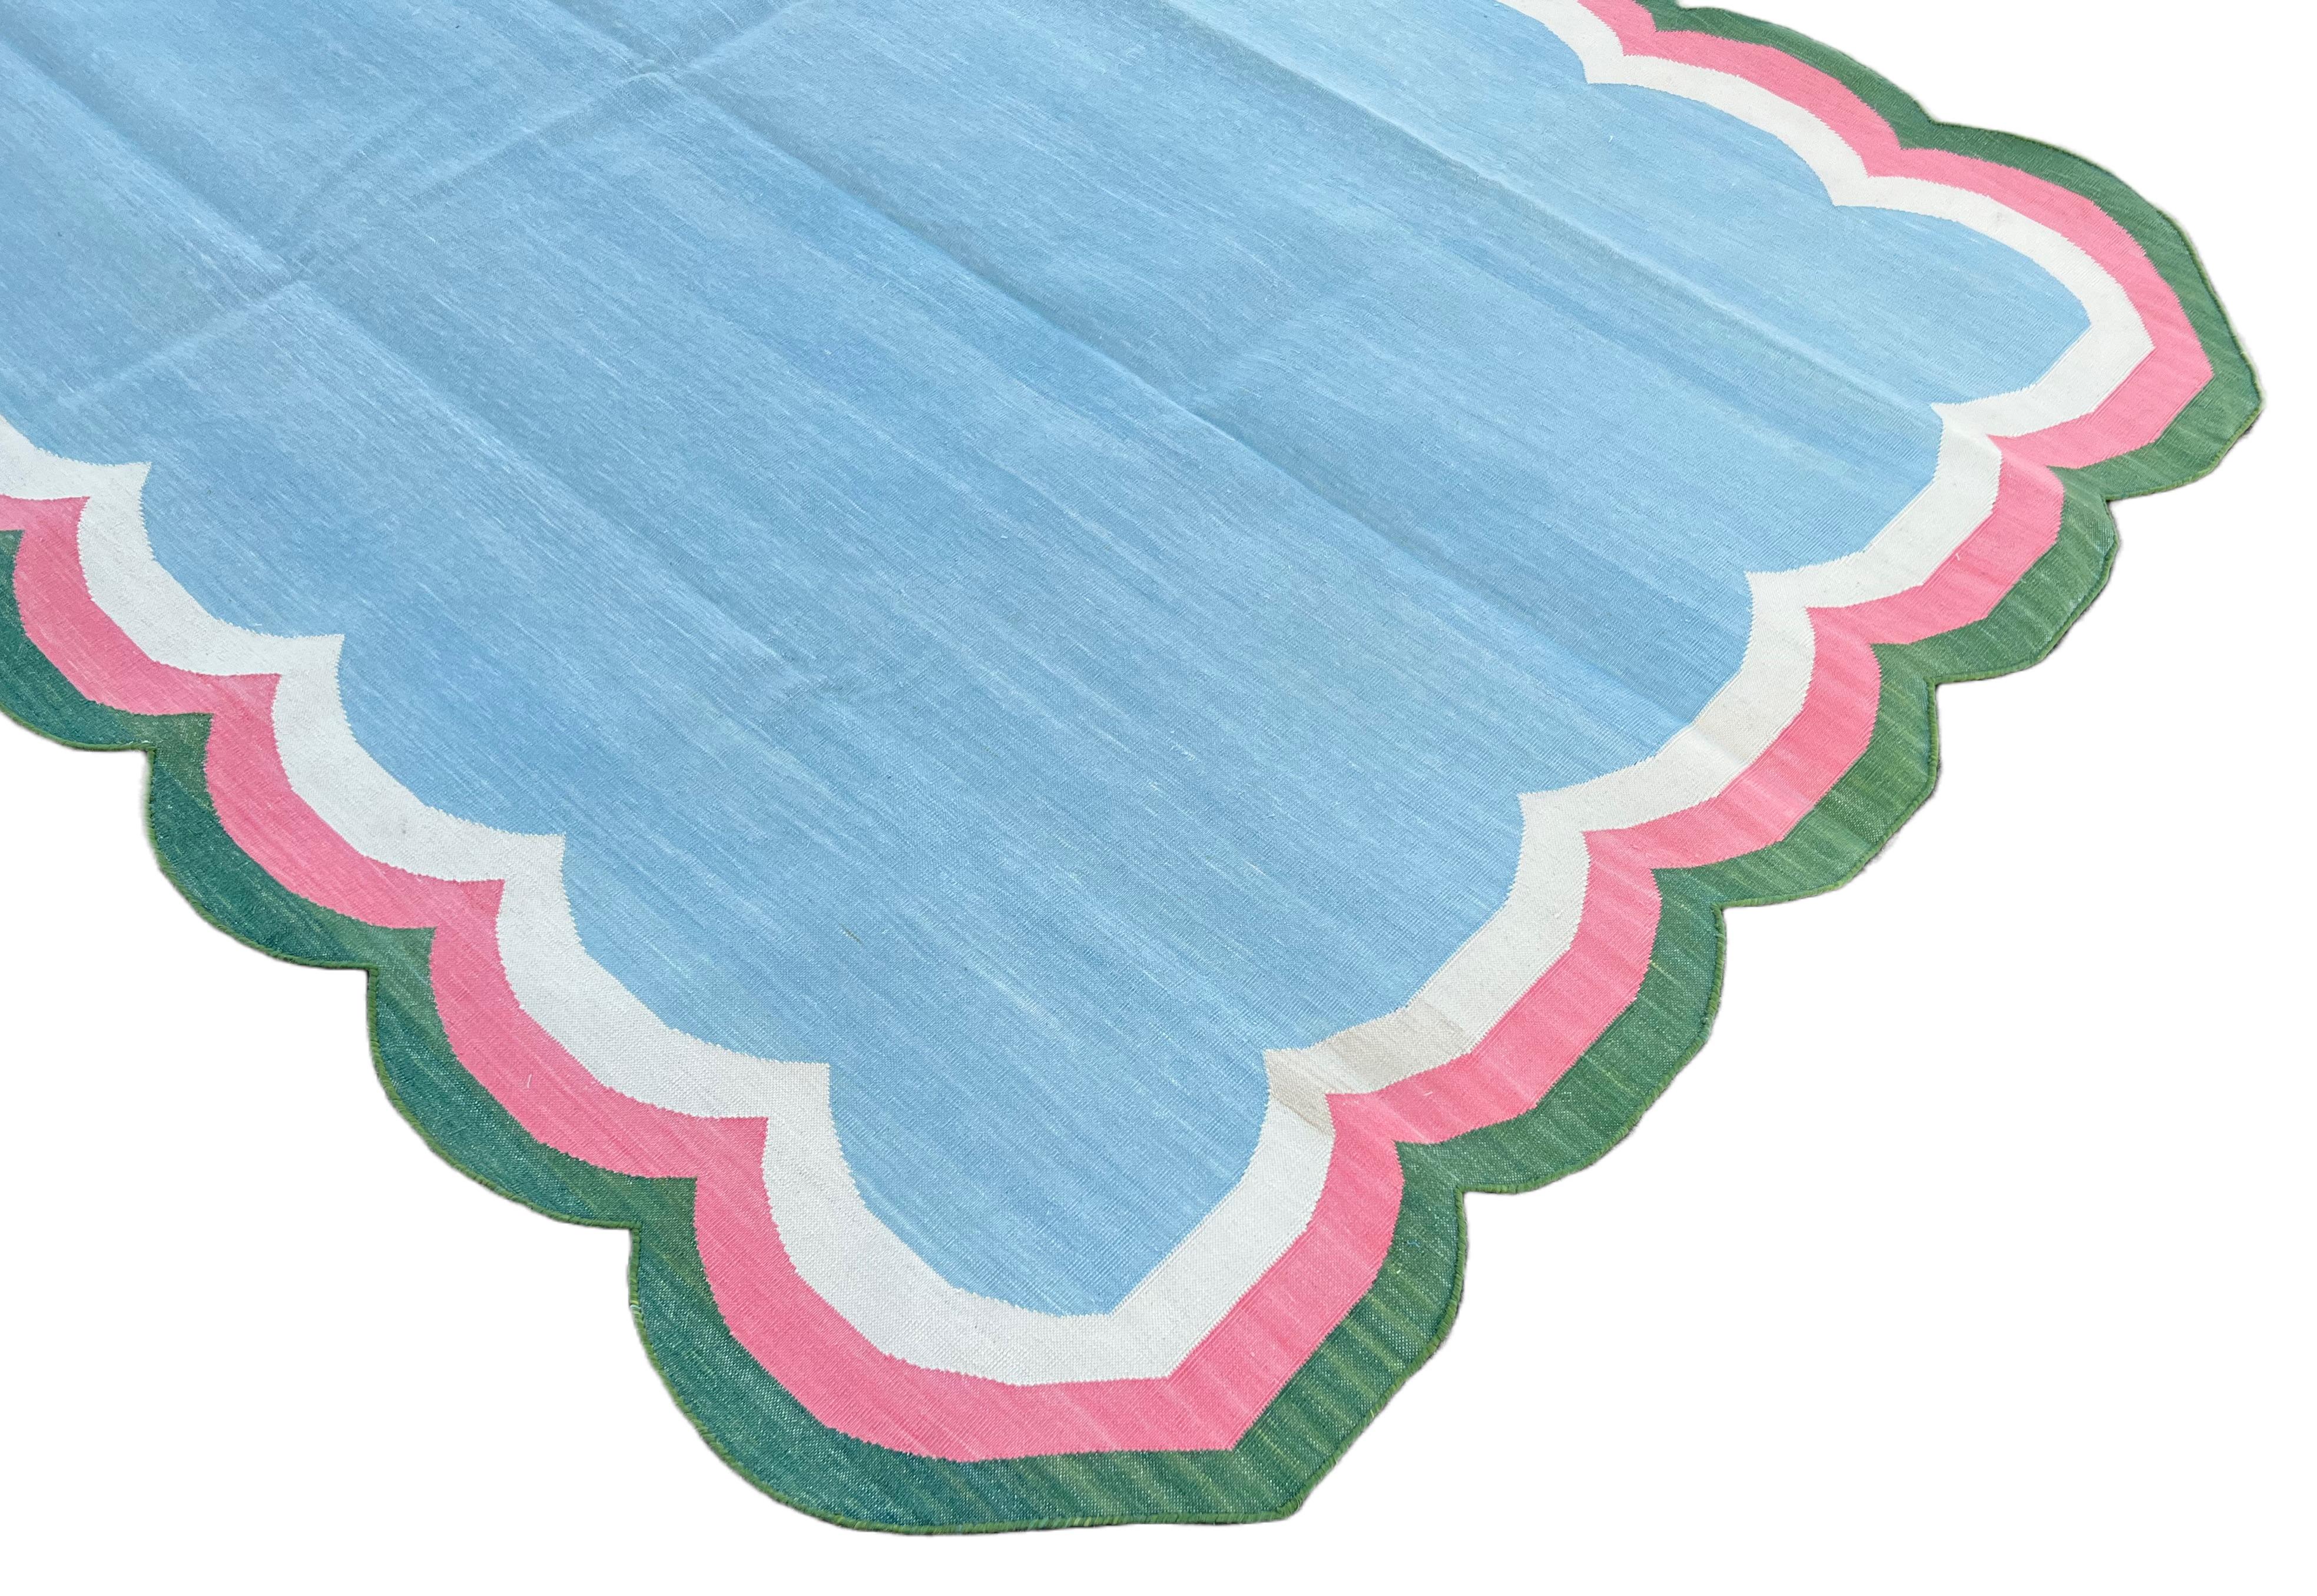 Hand-Woven Handmade Cotton Area Flat Weave Rug, Blue, Pink, Green Scalloped Indian Dhurrie For Sale